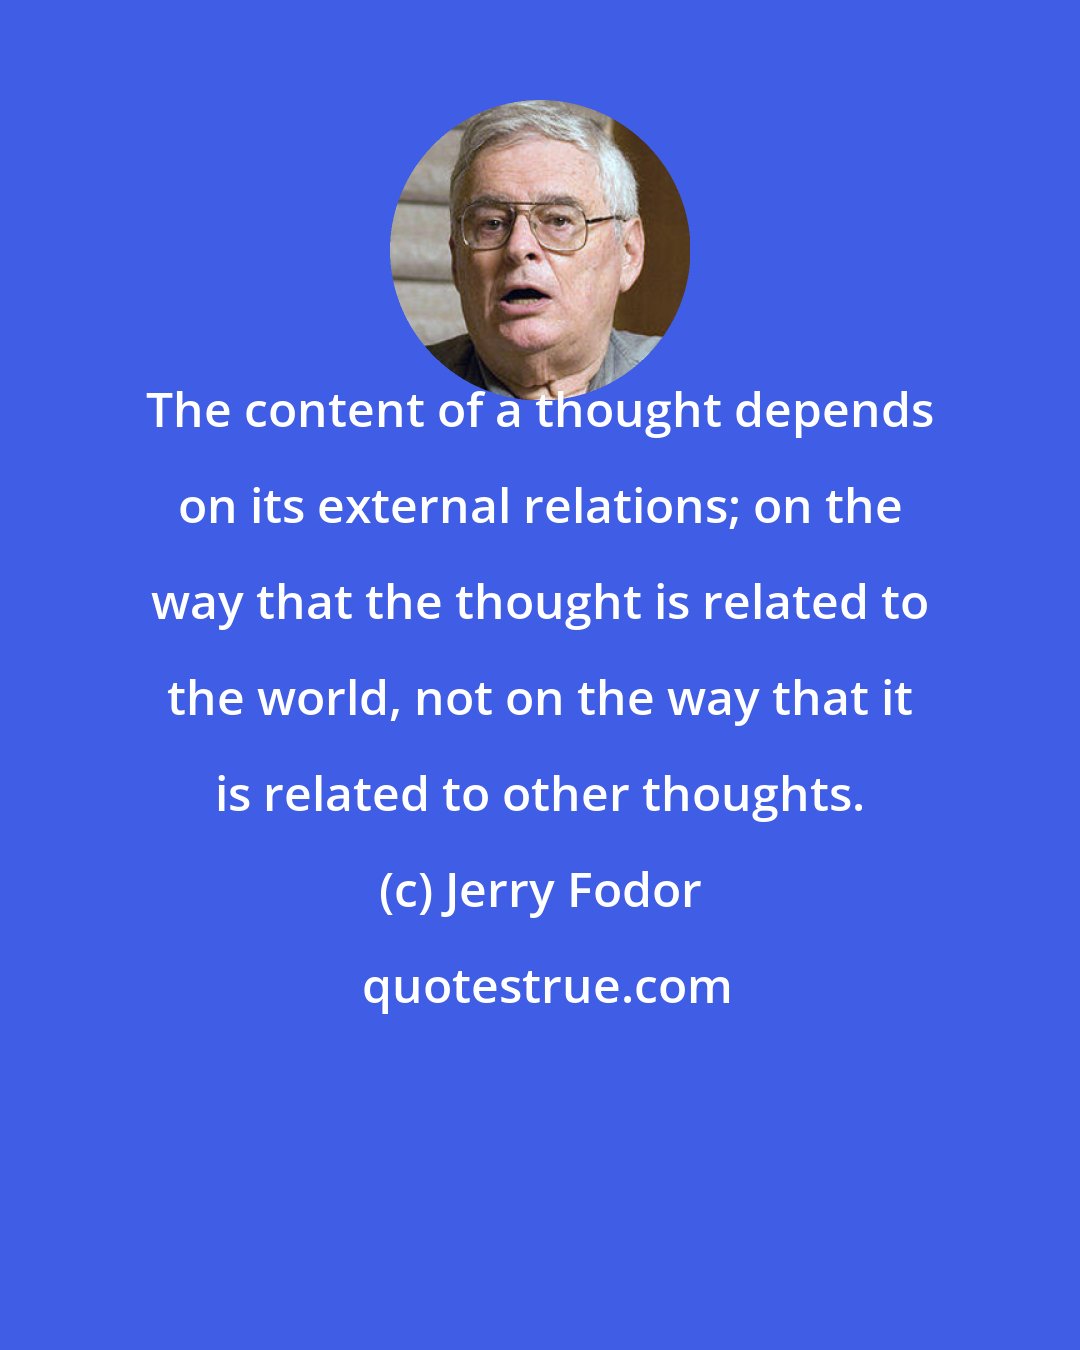 Jerry Fodor: The content of a thought depends on its external relations; on the way that the thought is related to the world, not on the way that it is related to other thoughts.